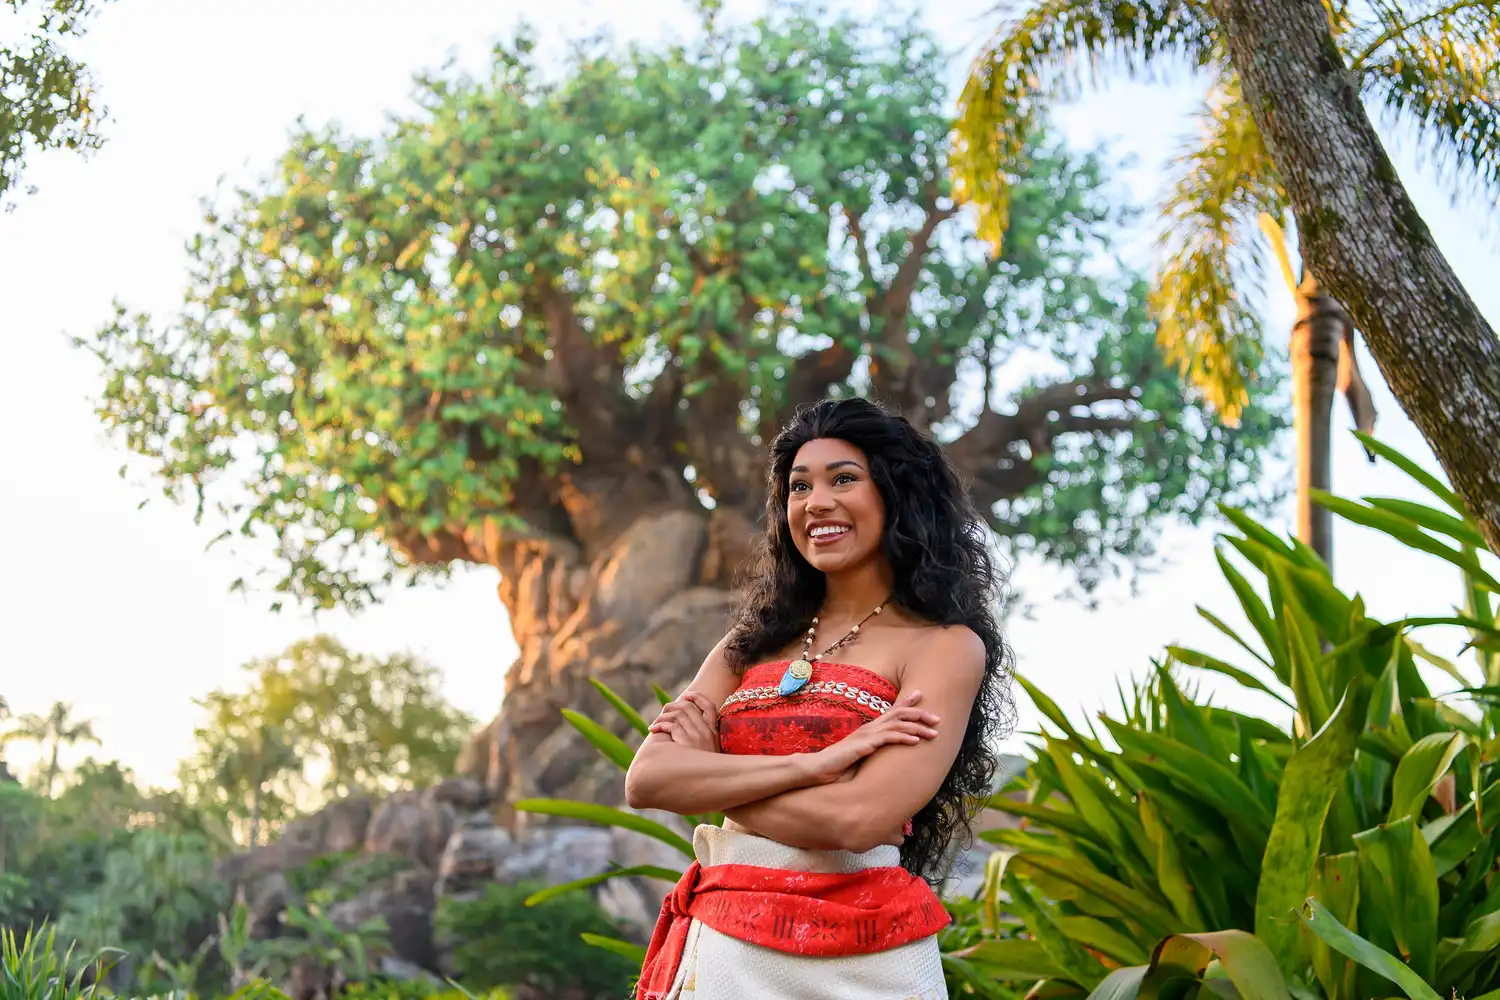 New Character Experiences Coming To Disney World